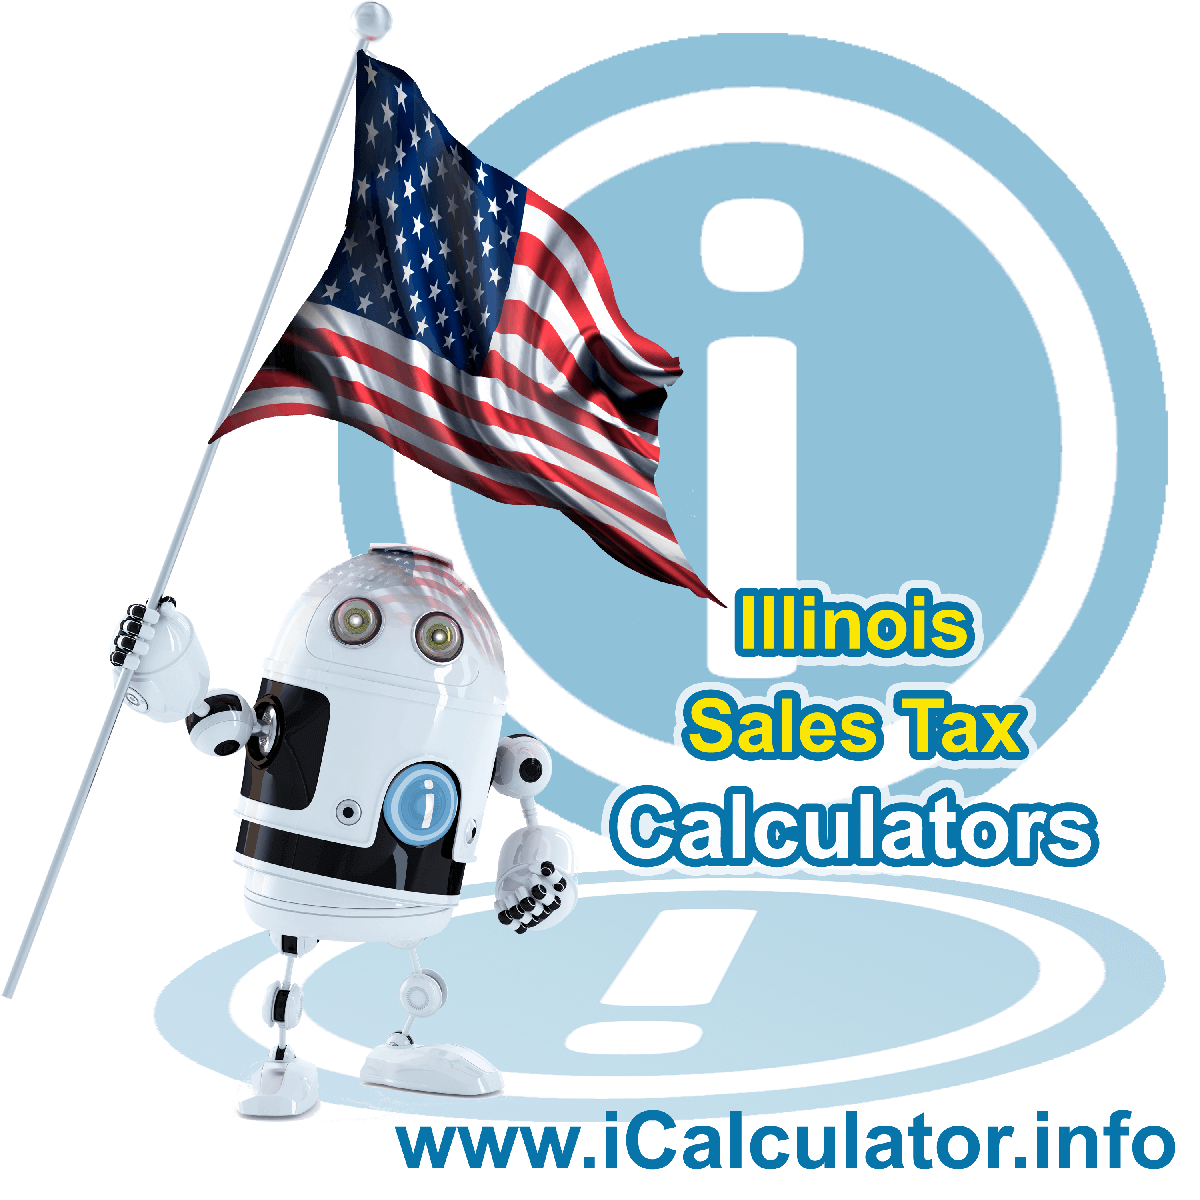 Illinois Sales Tax Comparison Calculator: This image illustrates a calculator robot comparing sales tax in Illinois manually using the Illinois Sales Tax Formula. You can use this information to compare Sales Tax manually or use the Illinois Sales Tax Comparison Calculator to calculate and compare Illinois sales tax online.